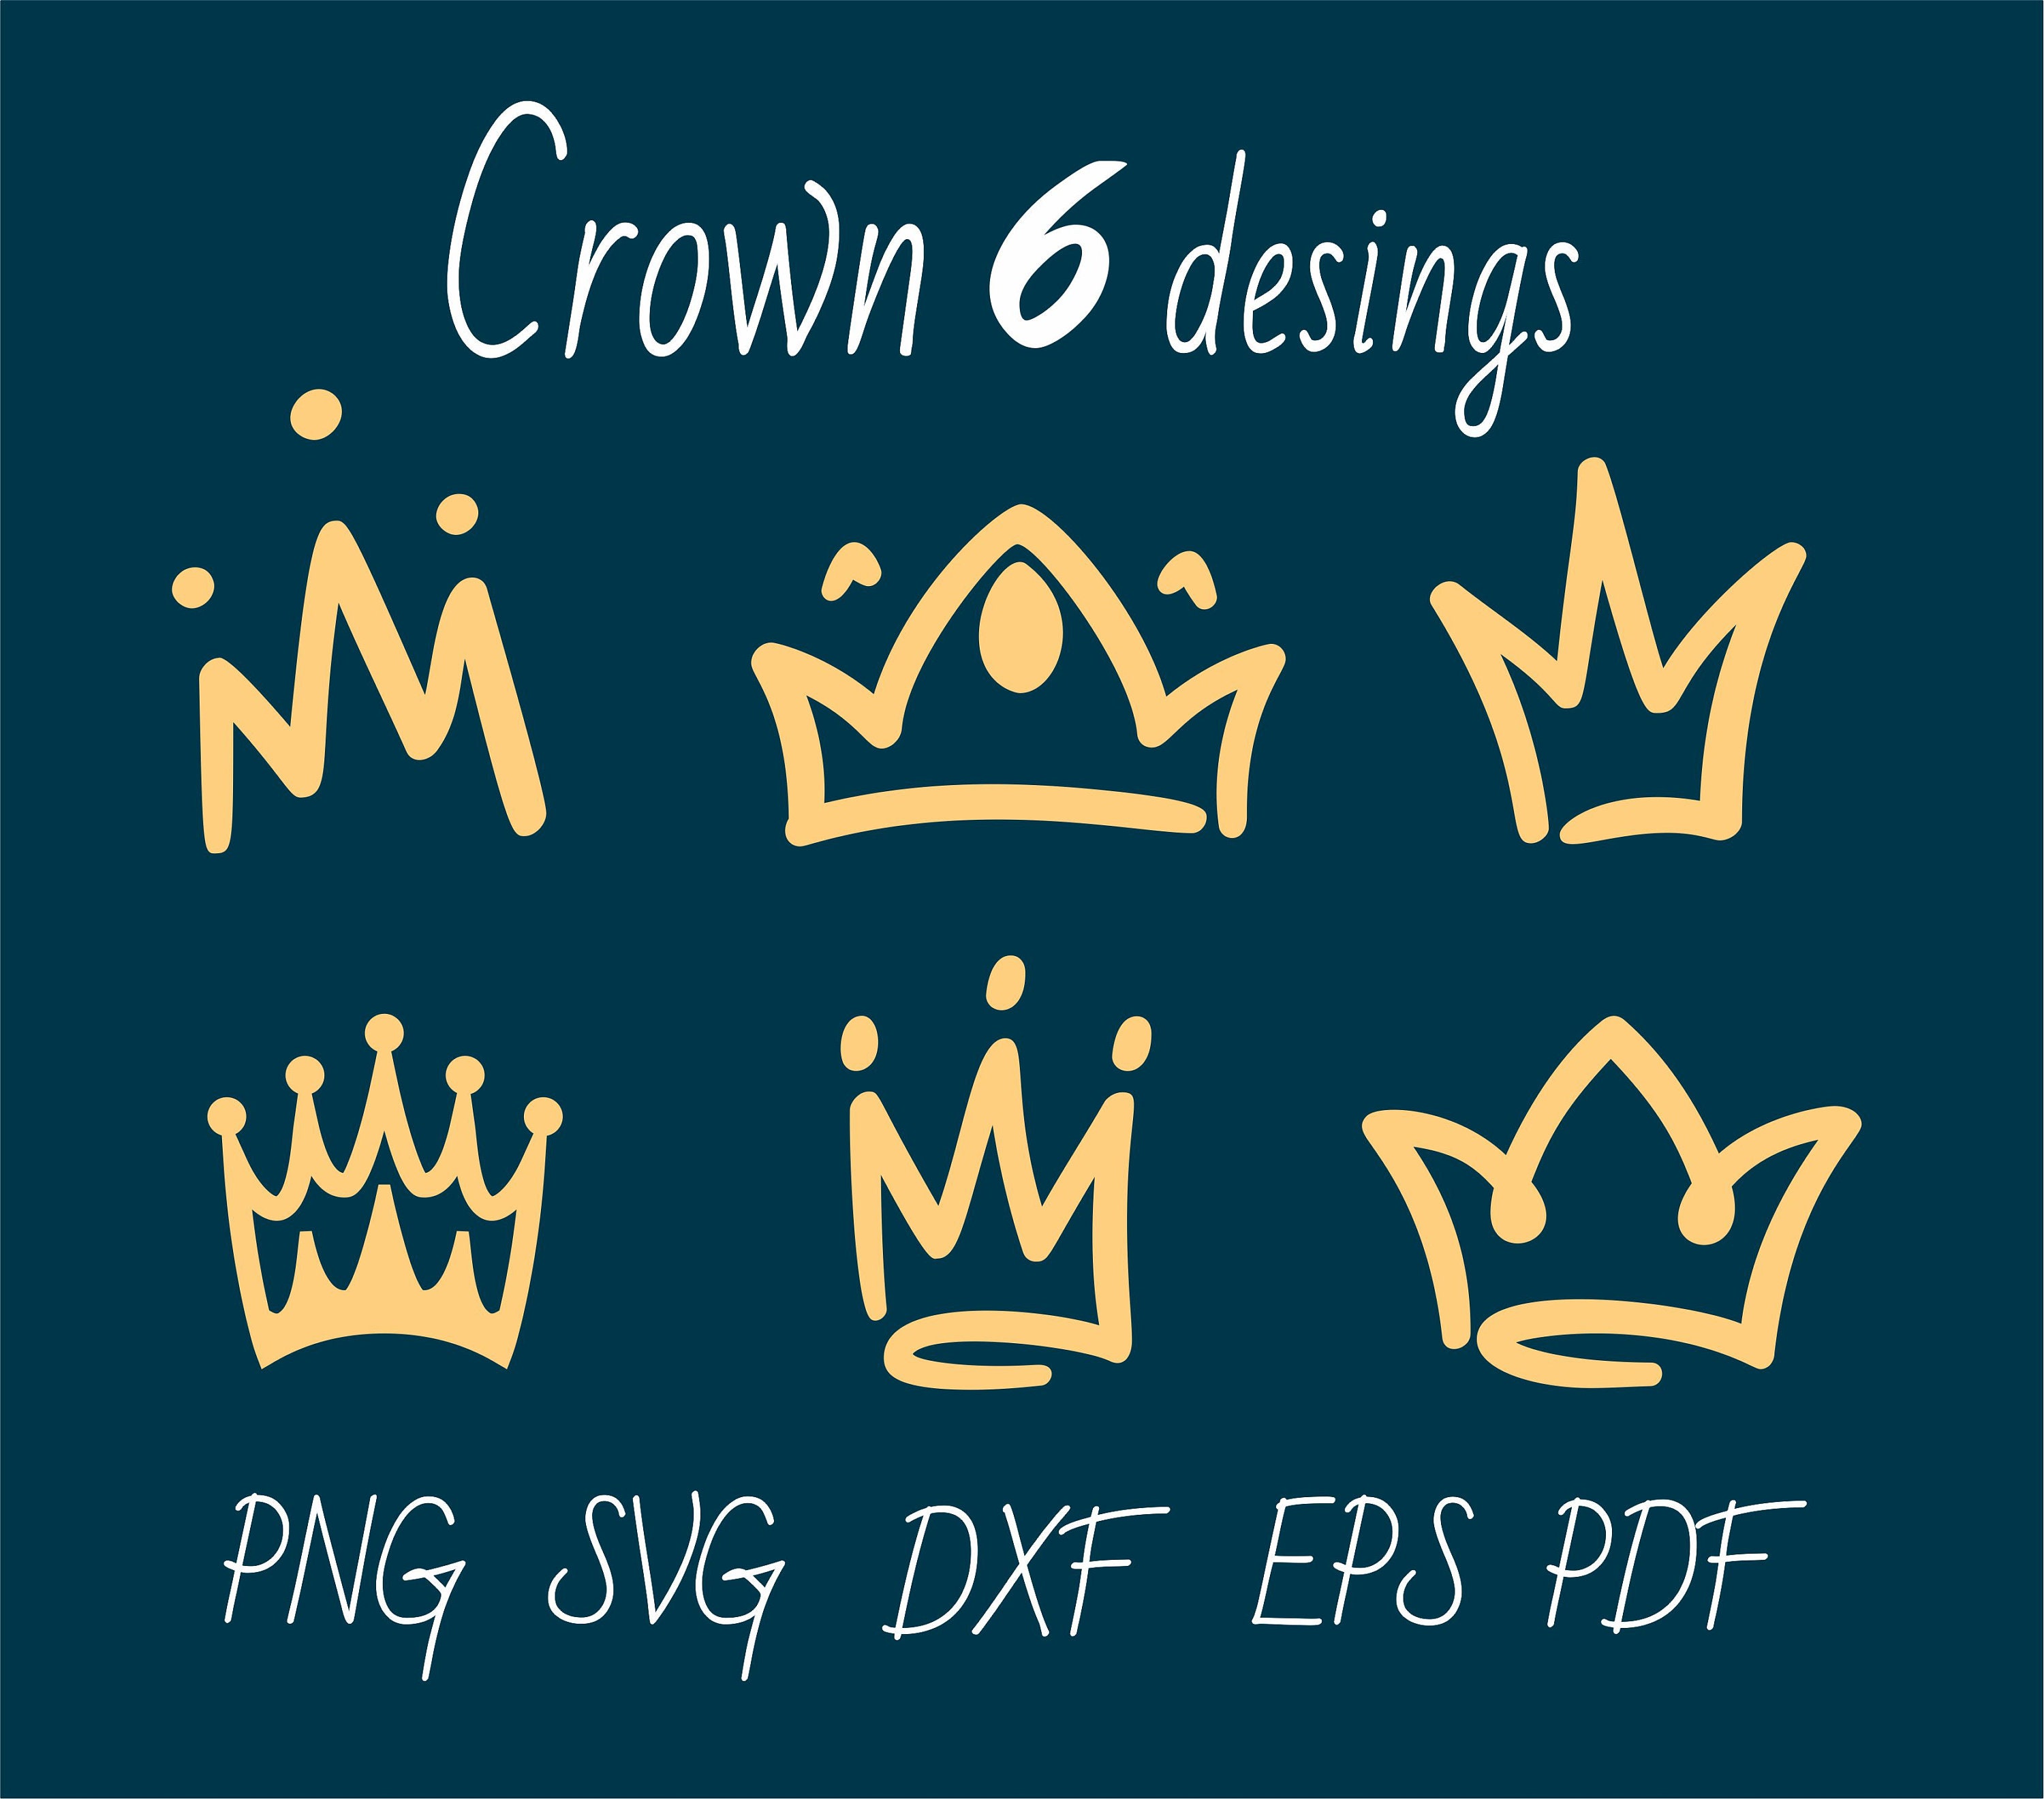 Sketch crowns. Hand drawn king, queen crown and princess tiara